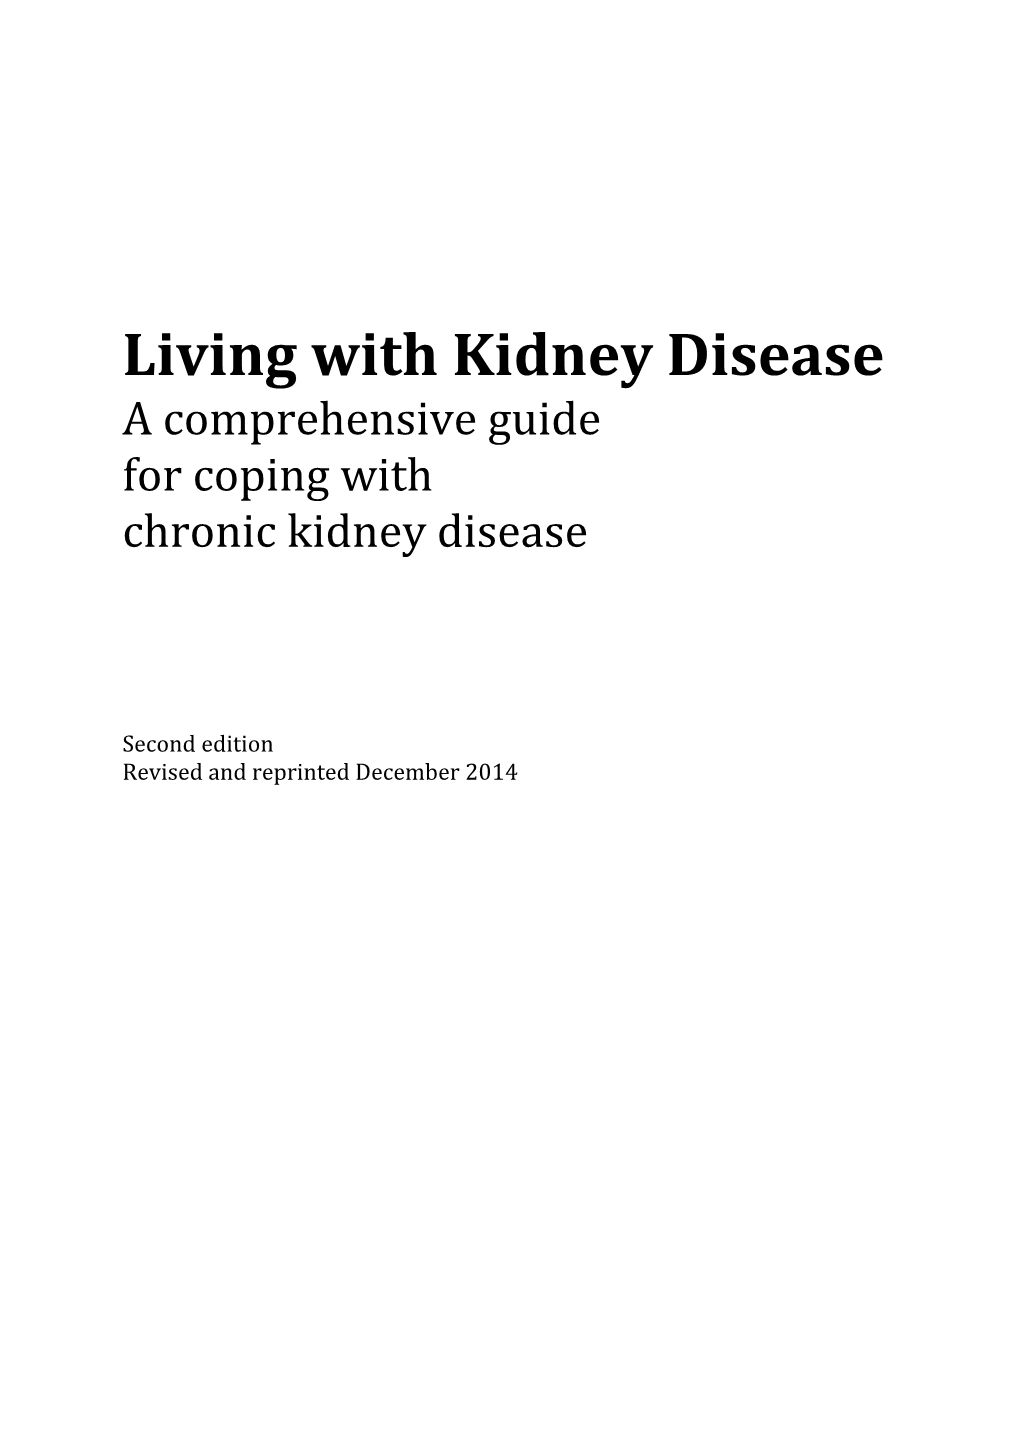 Living with Kidney Disease: a Comprehensive Guide s1